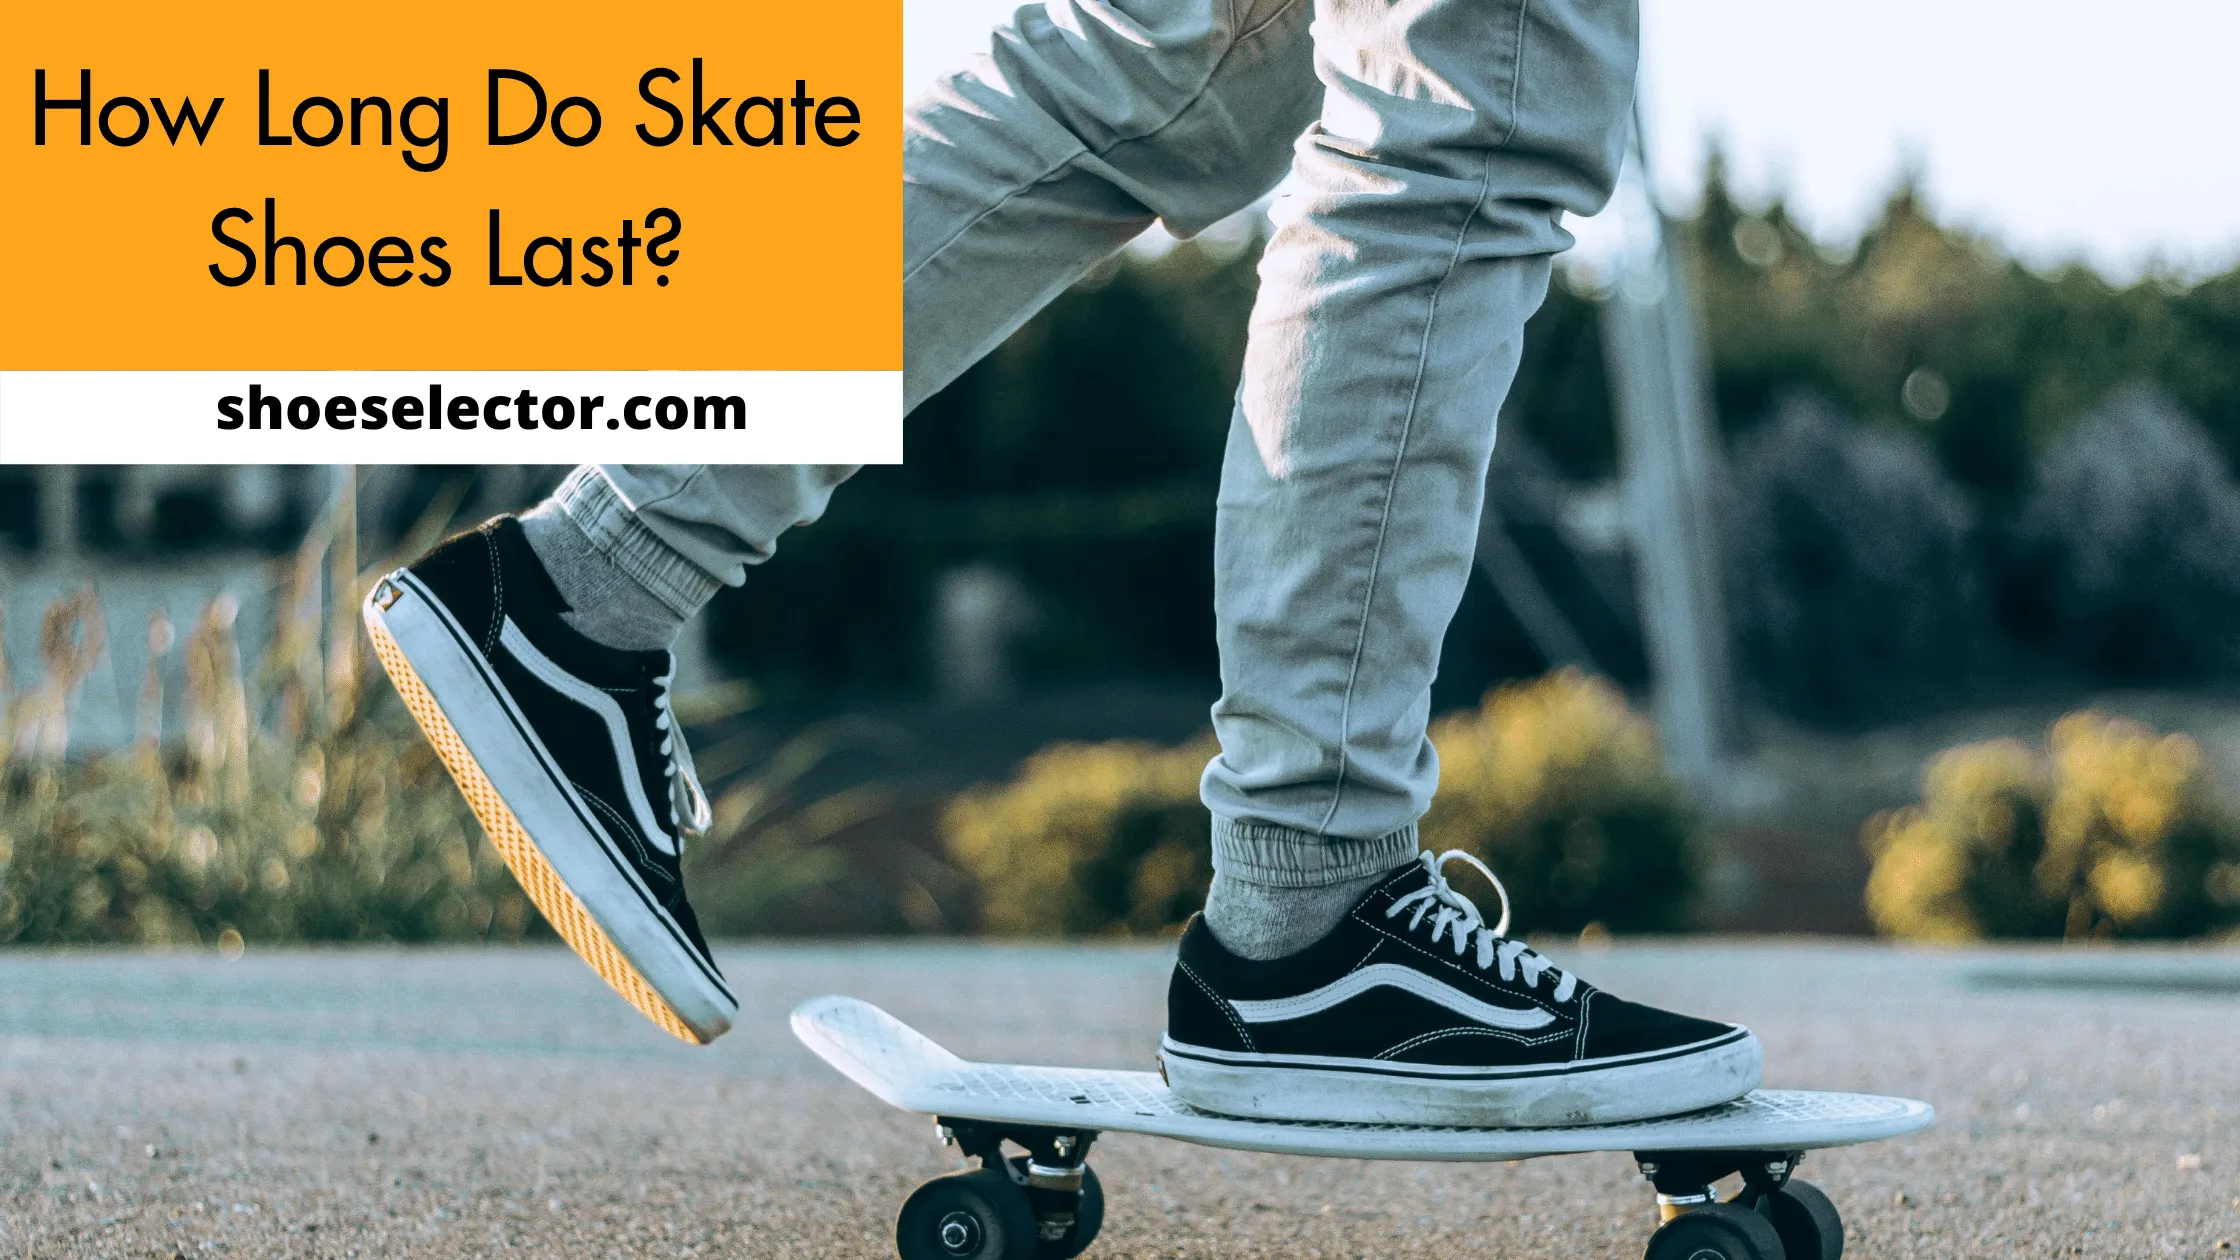 How Long Do Skate Shoes Last? - Quick Guide